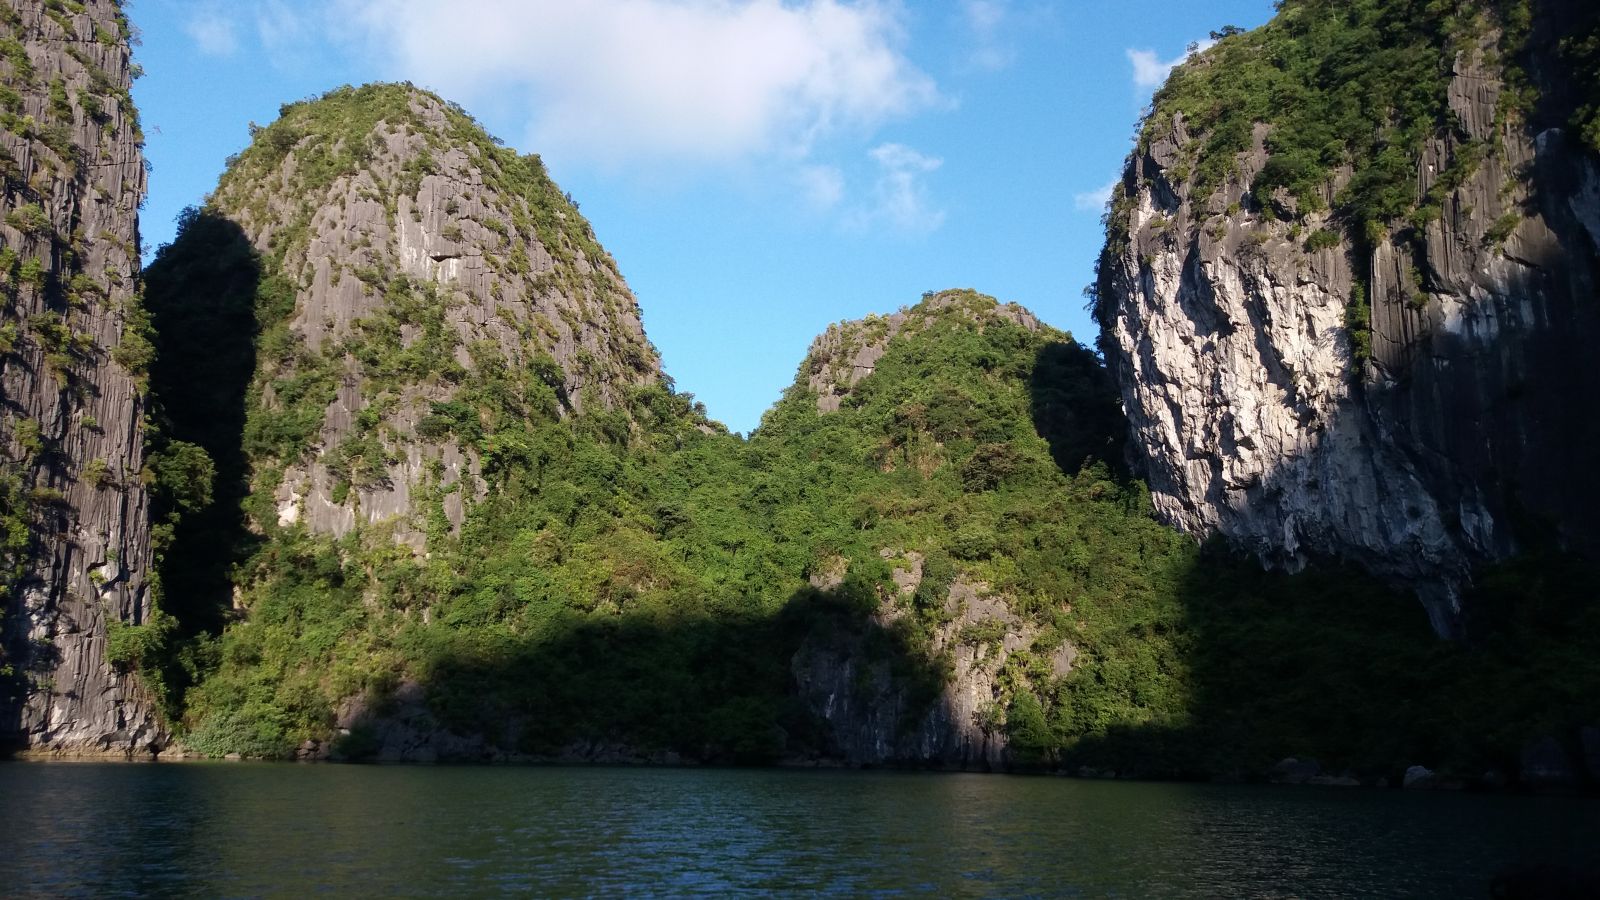 Inspection trip to Halong bay2